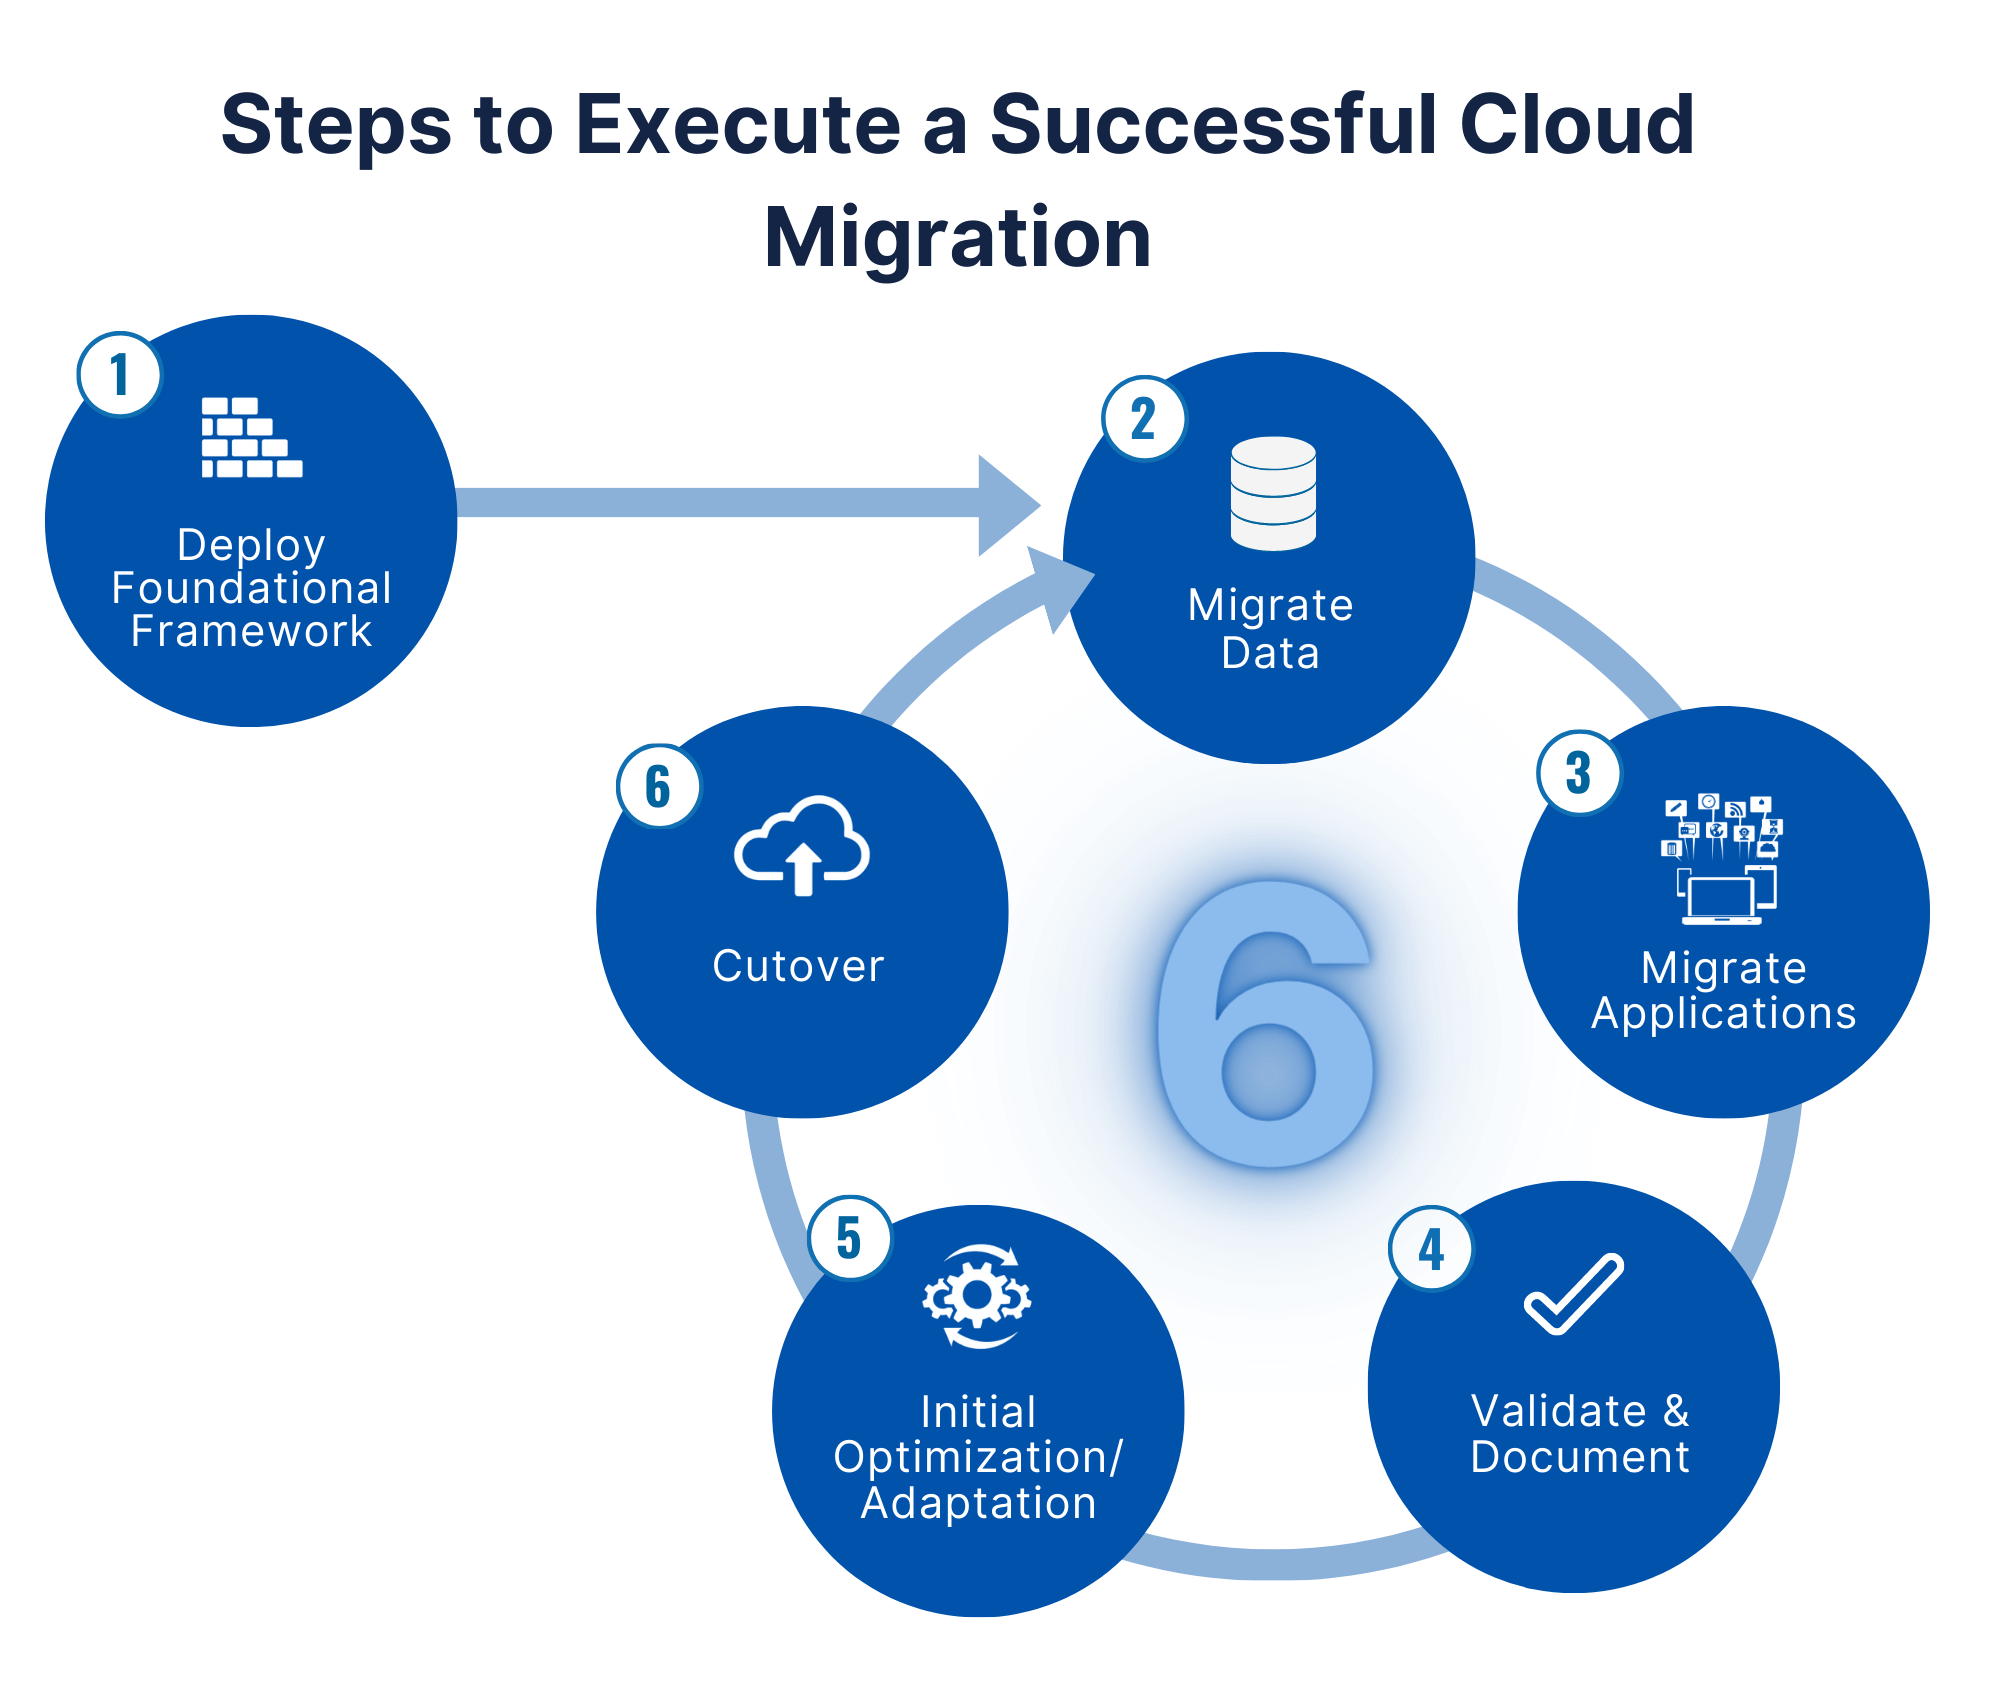 Six blue circles followed by light blue arrows represent six steps to executing a successful cloud migration. Each circle includes a number, step, and icon in white font. 